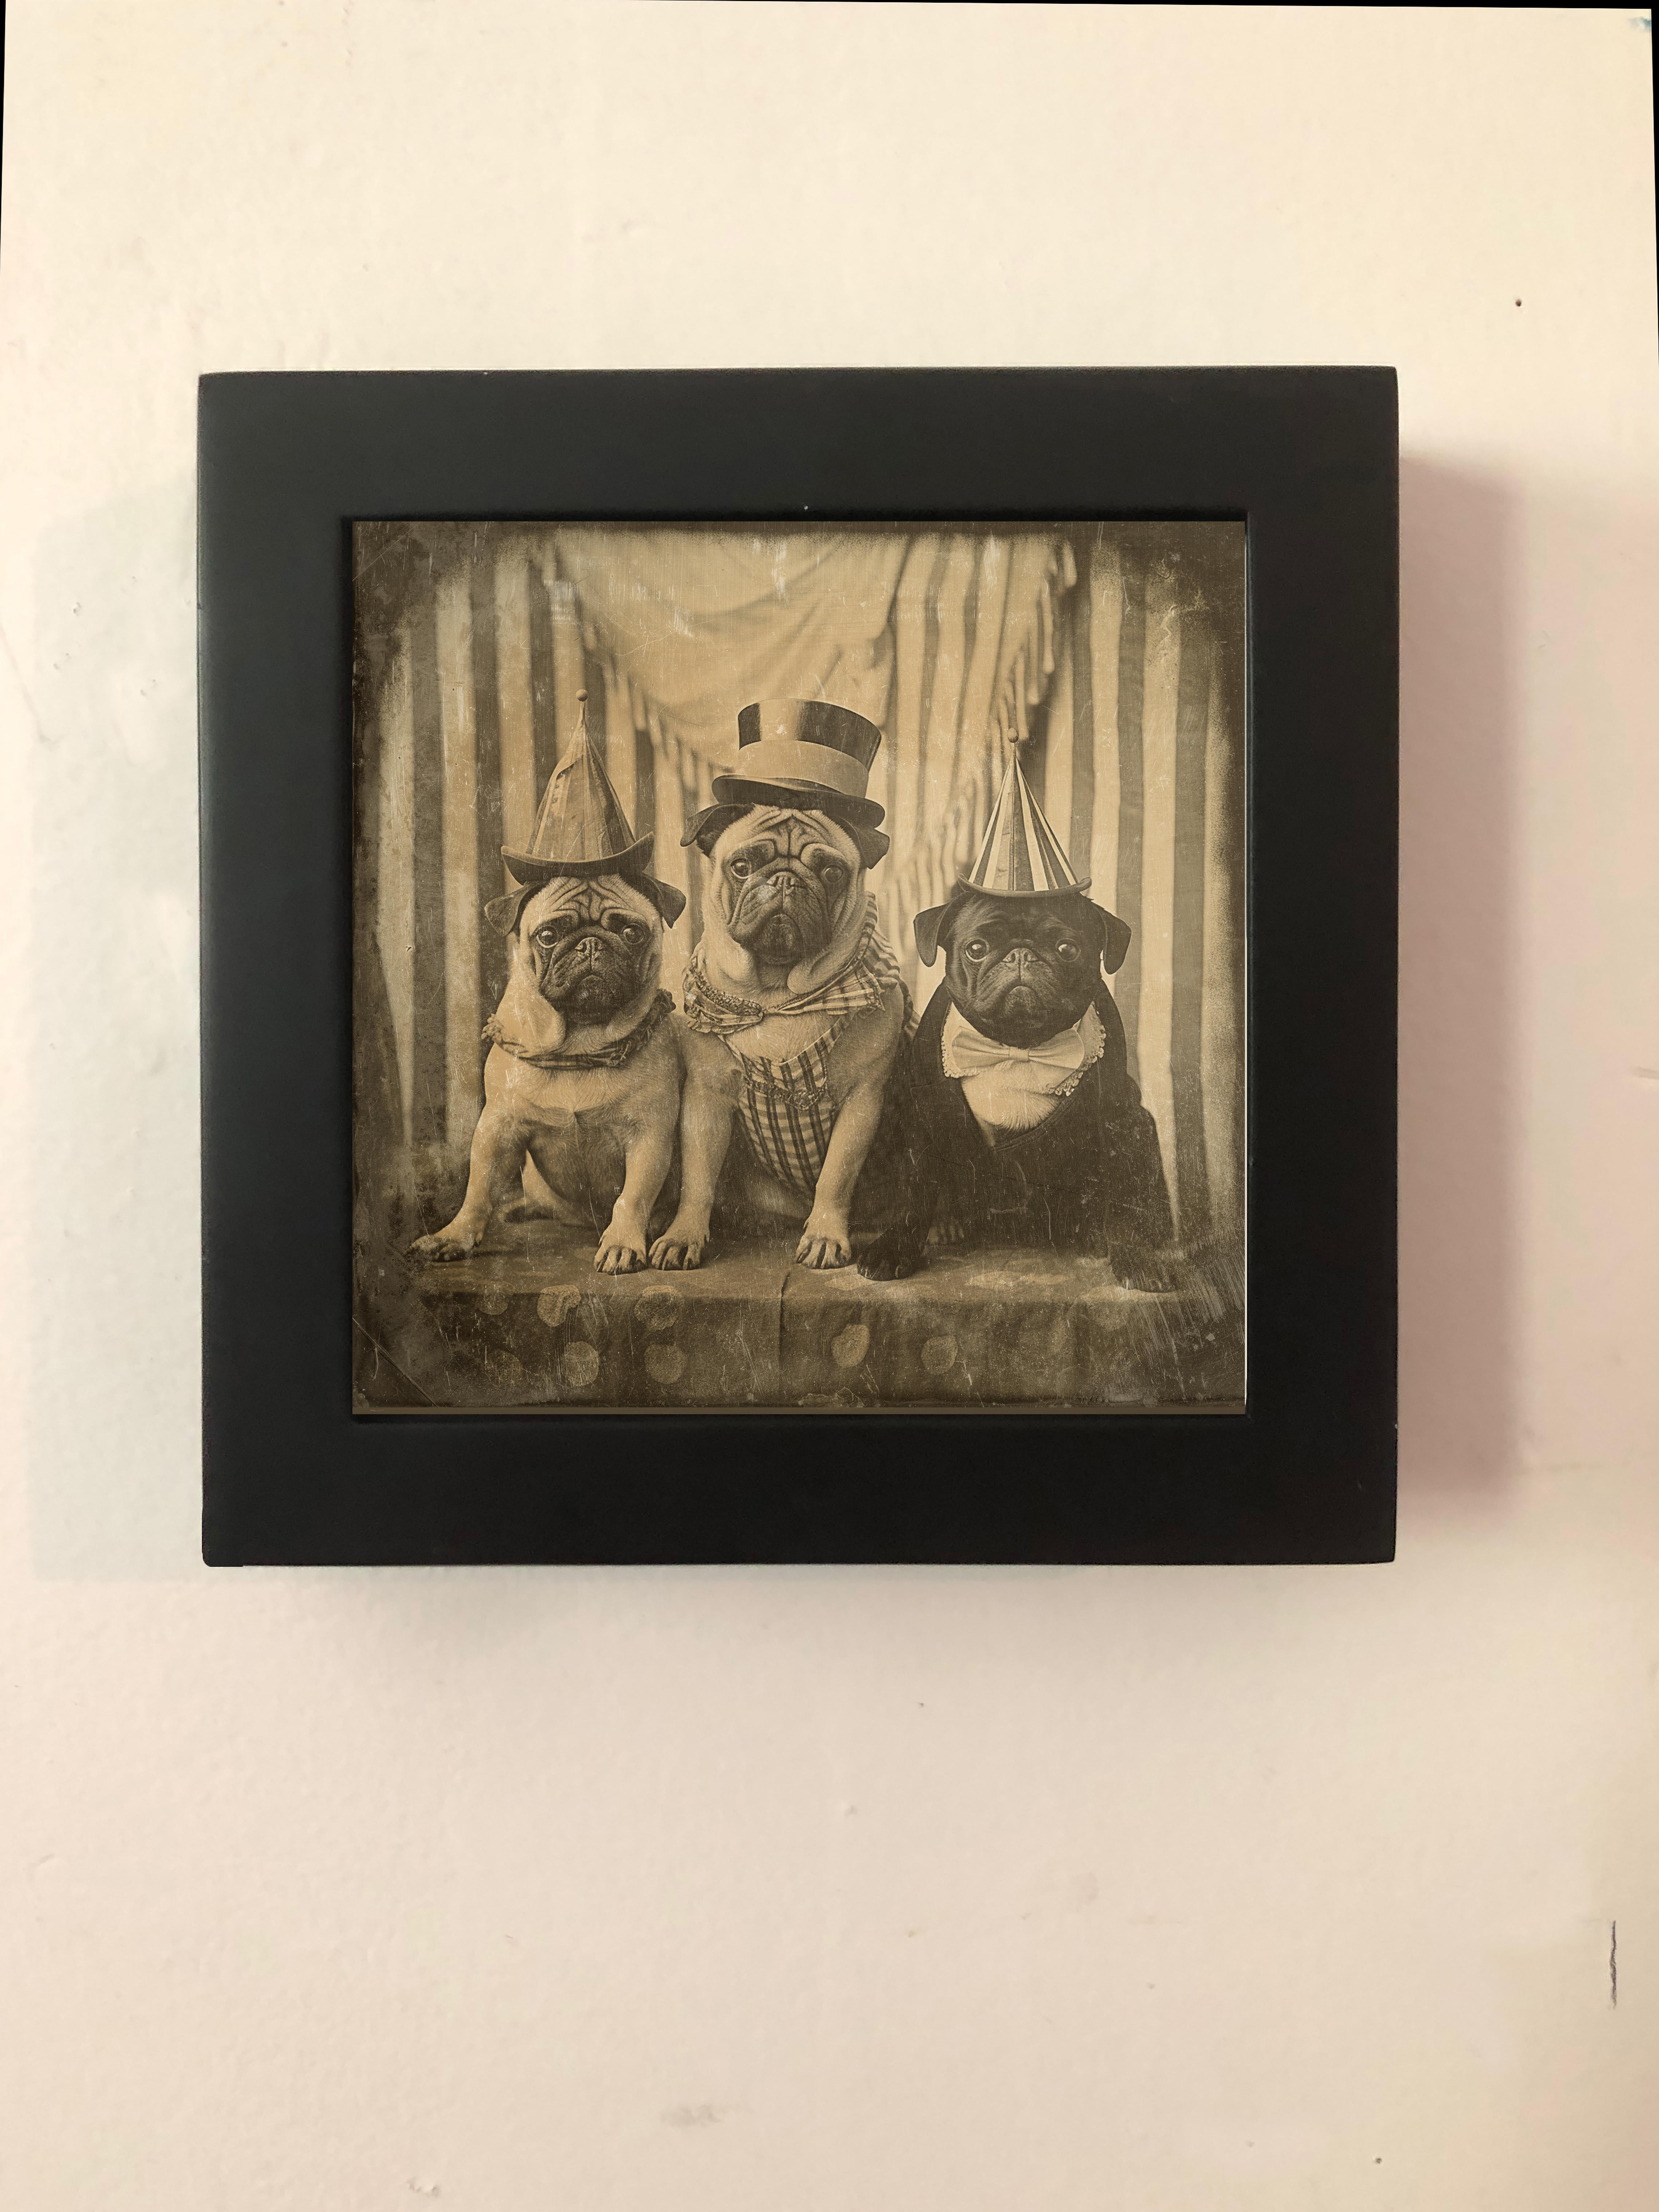 Three Circus Pugs - enchanting exotic daguerreotype reproduction Framed - Brown Figurative Photograph by FPA Francis Pavy Artist